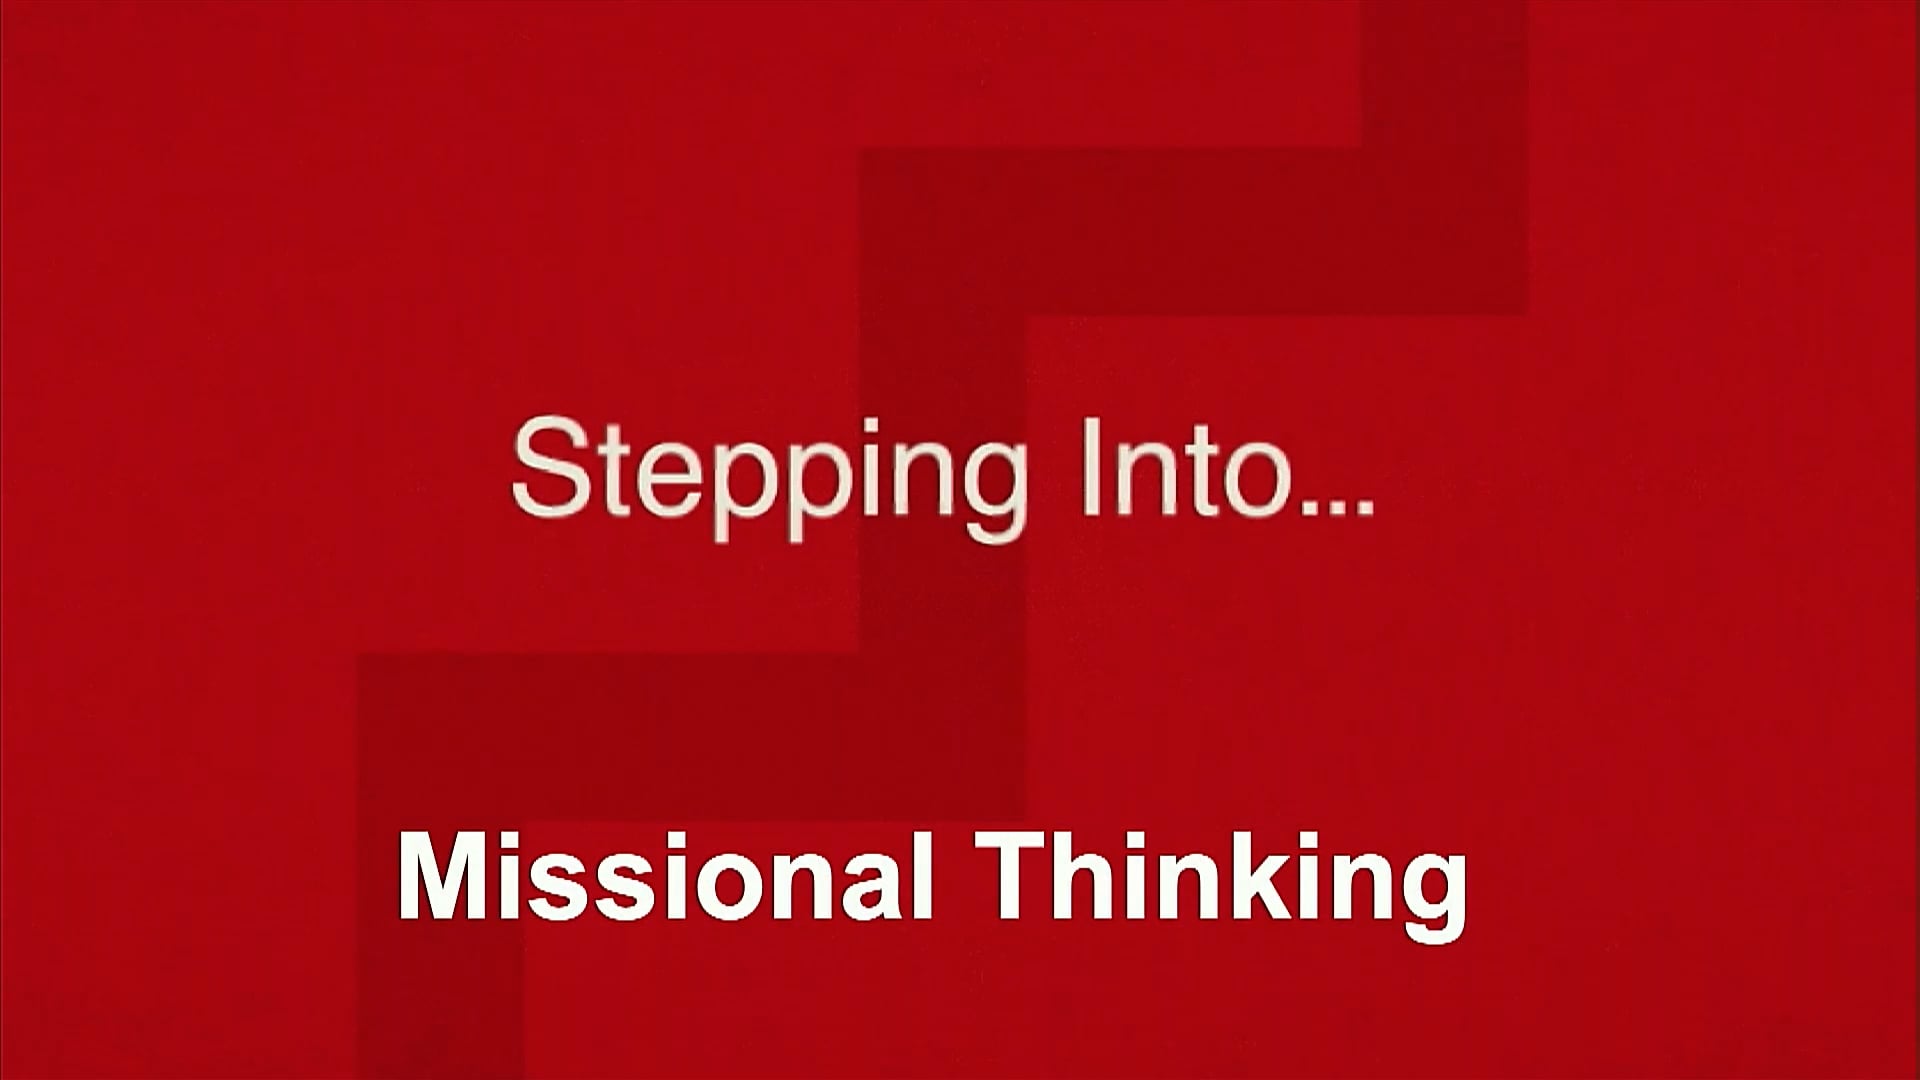 18. Stepping Into...Missional Thinking - 010522